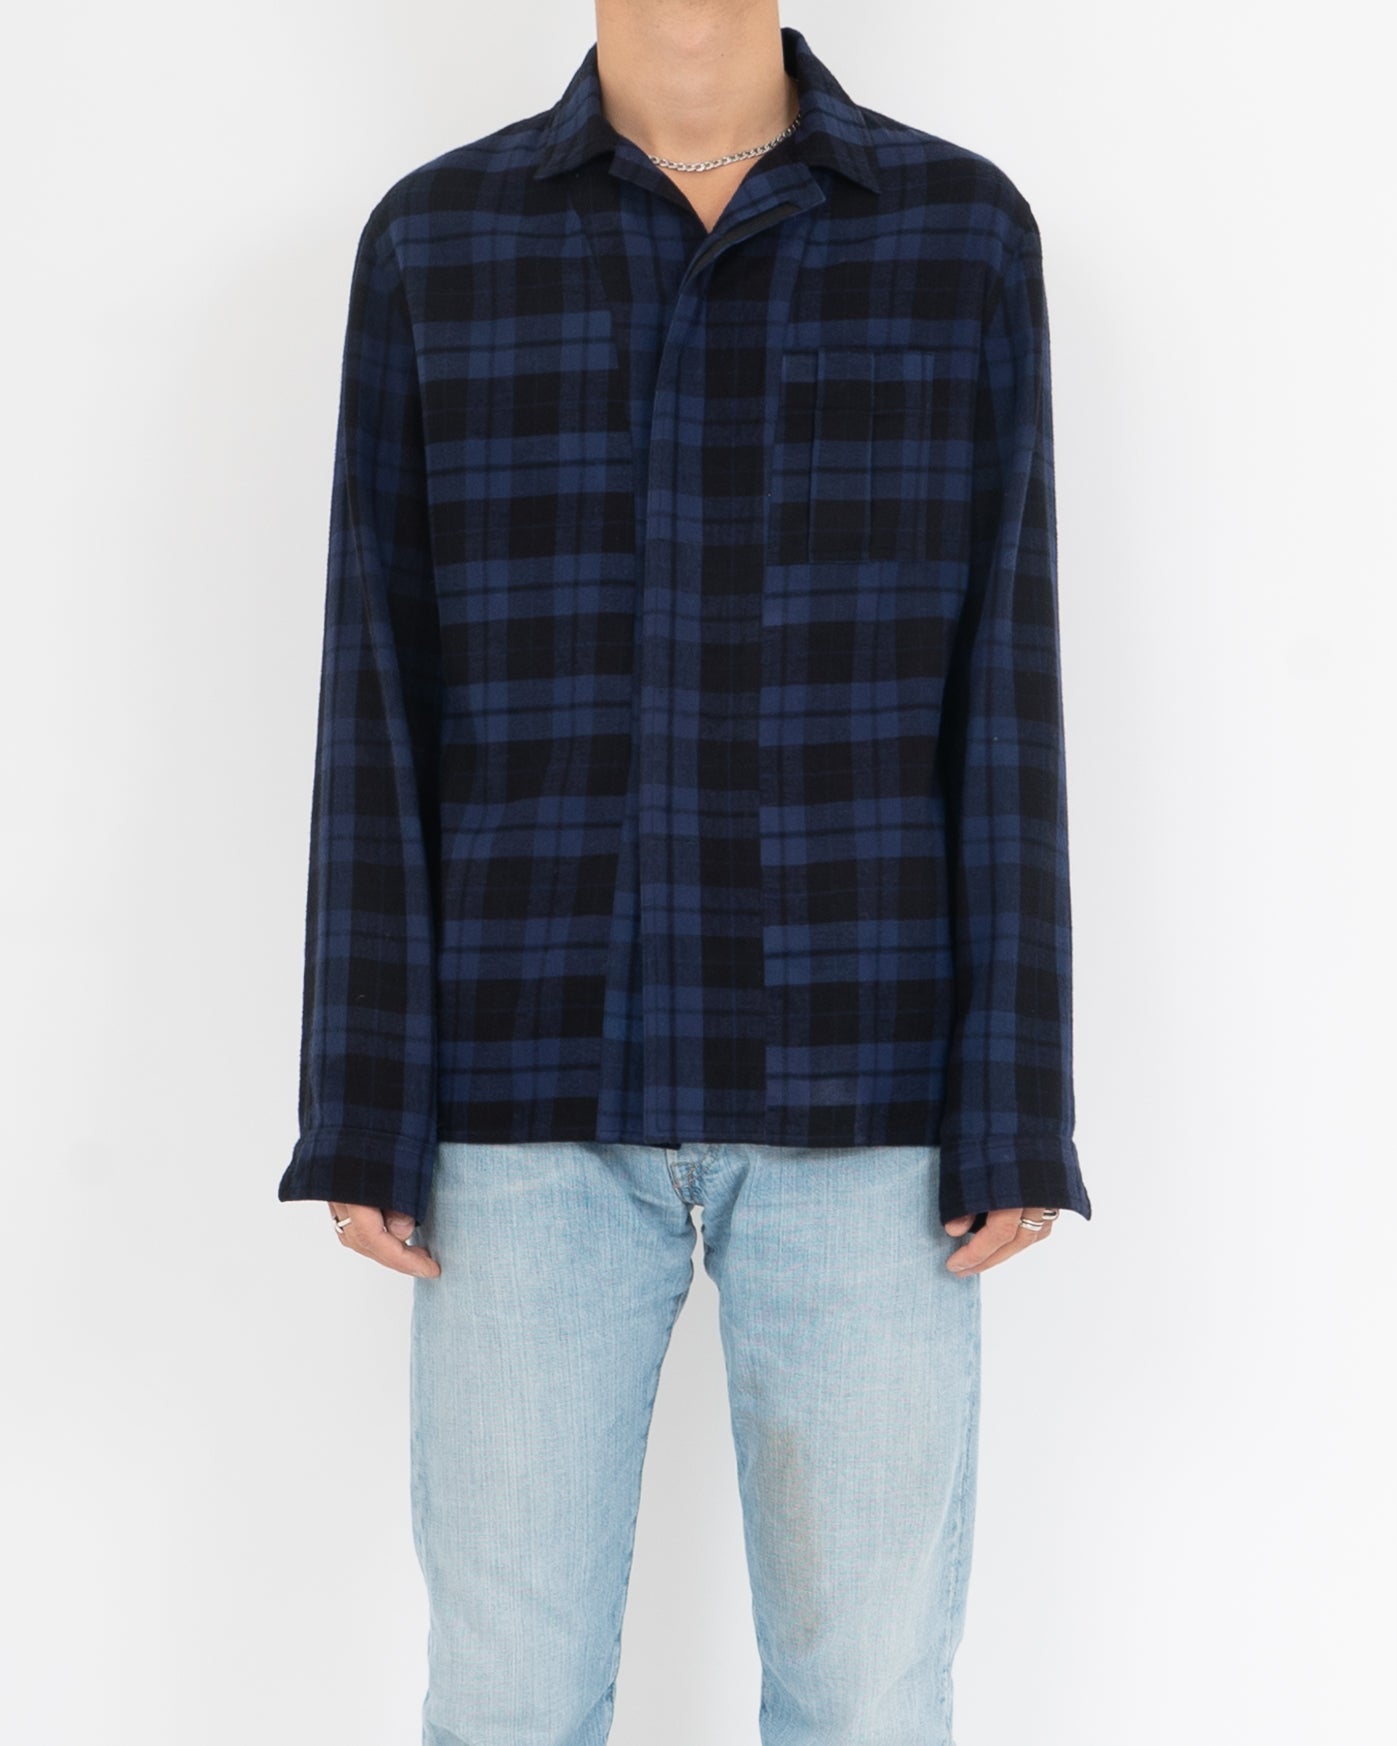 FW17 Pointed Collar Checked Blue Flannel Shirt